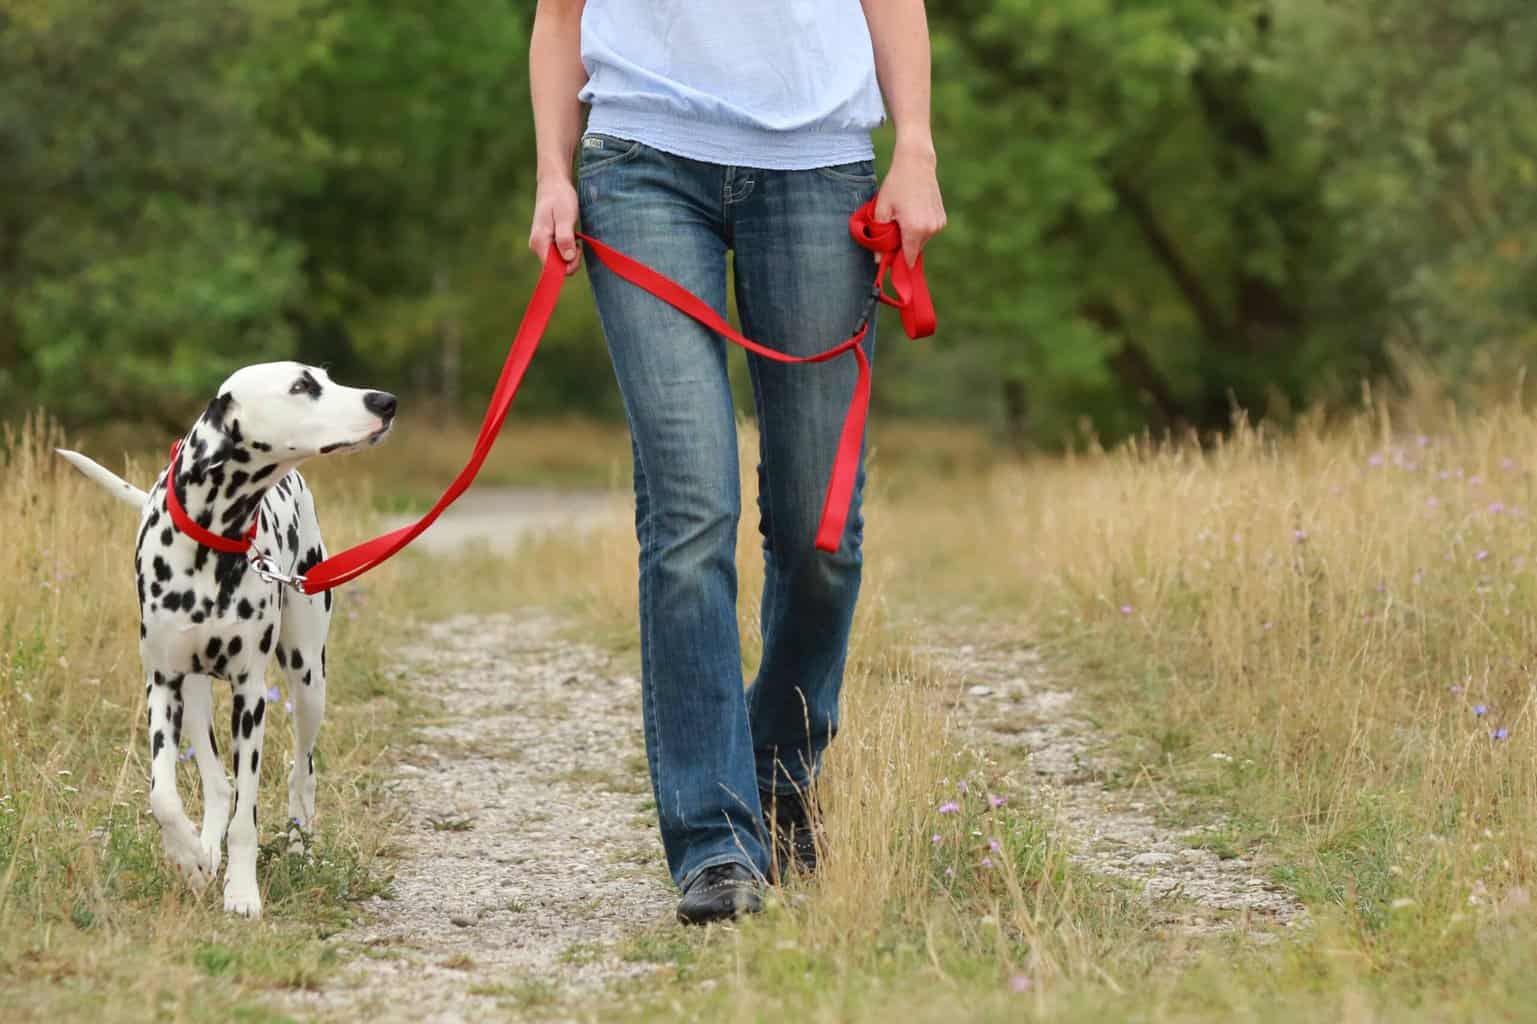 Woman walks with Dalmatian on loose leash. Understand leash training takes time and must be a lifelong process. Use the right leash, switch the route, and avoid adding stress.